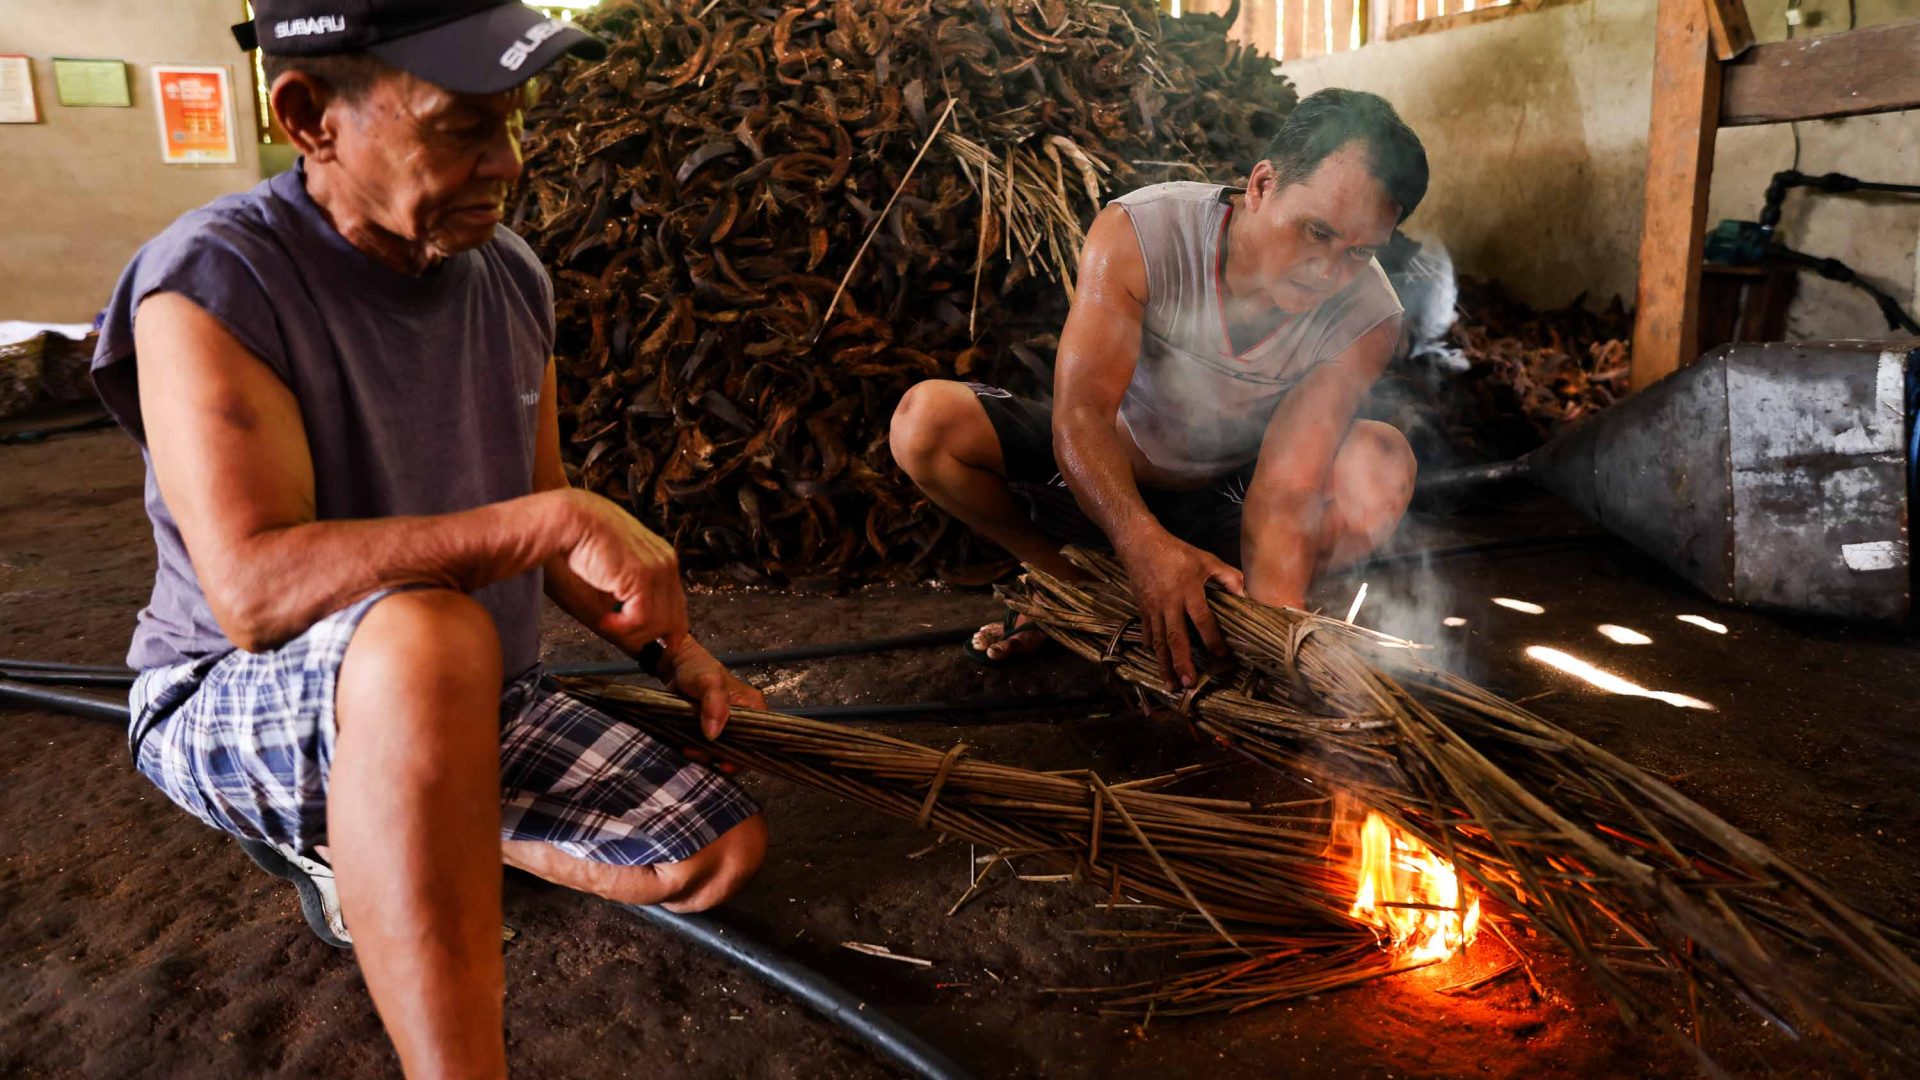 Coconut husks are burned by two men.